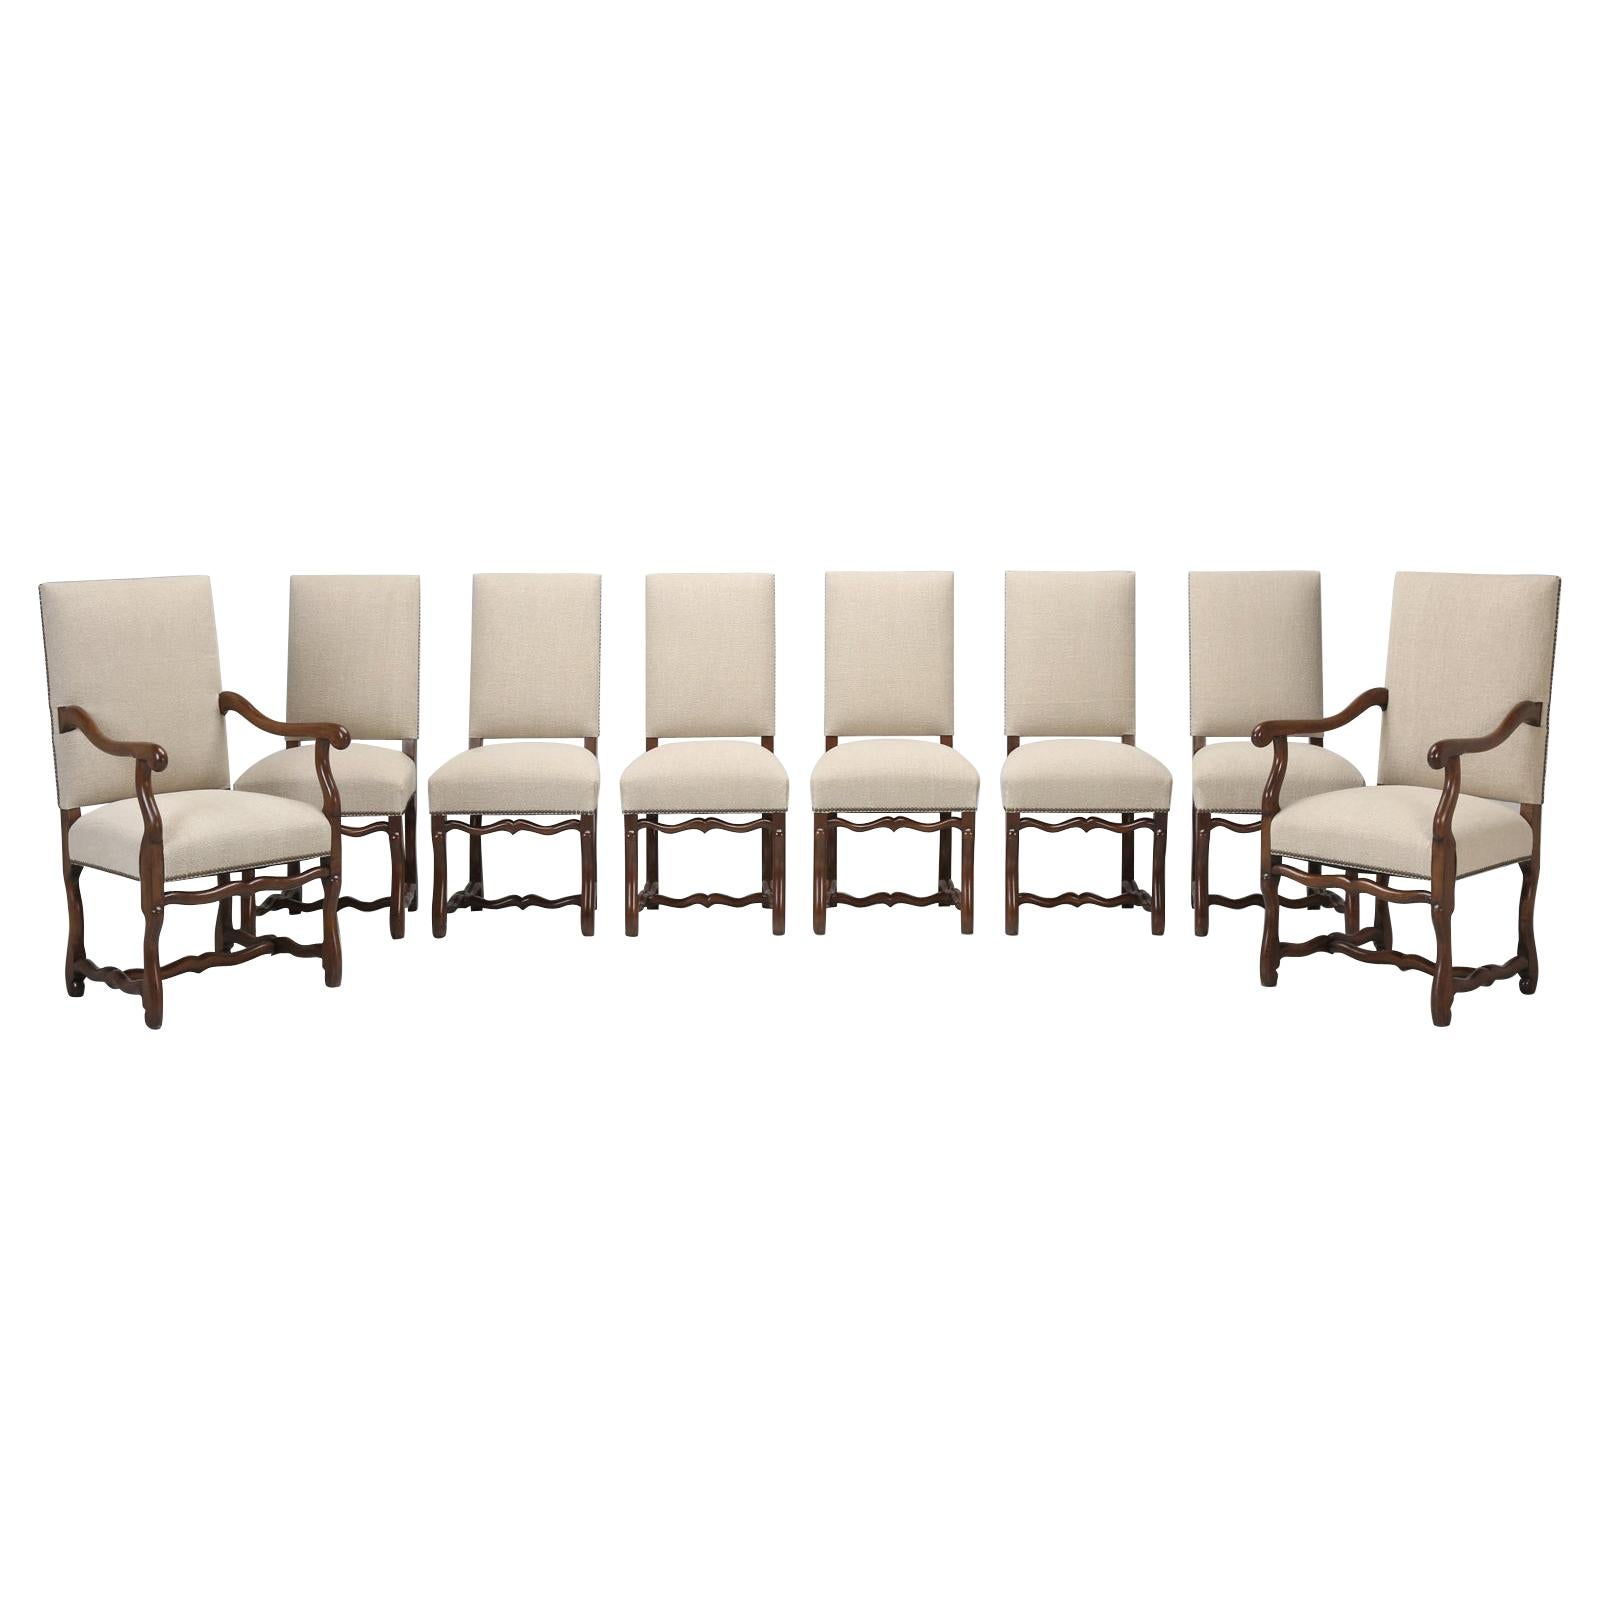 French Os De Mouton Dining Chairs, Set of 8, Irish Linen, Completely Restored